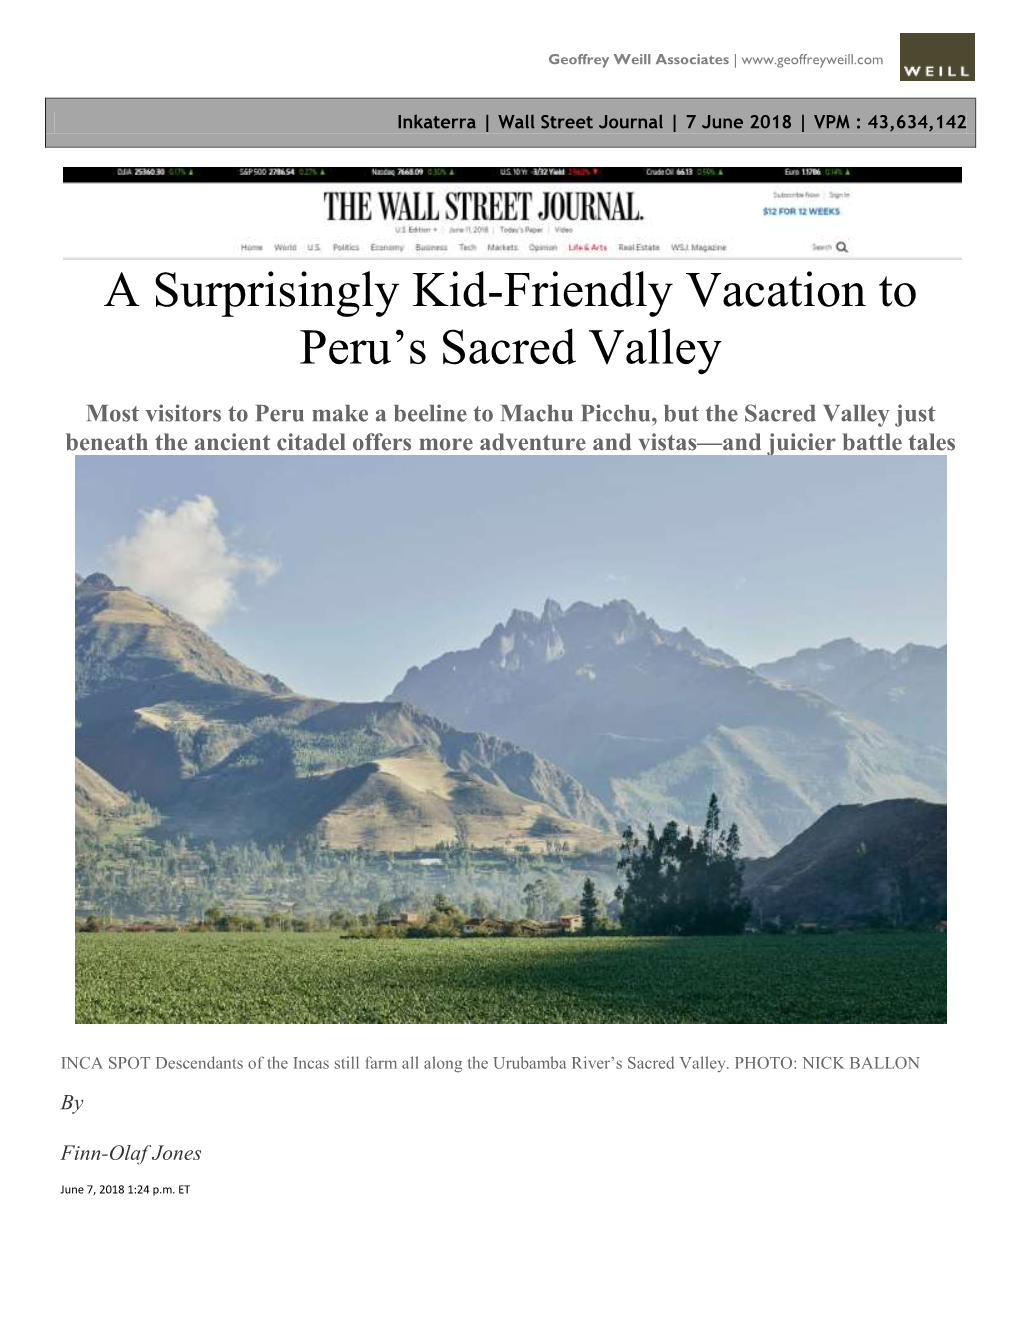 A Surprisingly Kid-Friendly Vacation to Peru's Sacred Valley